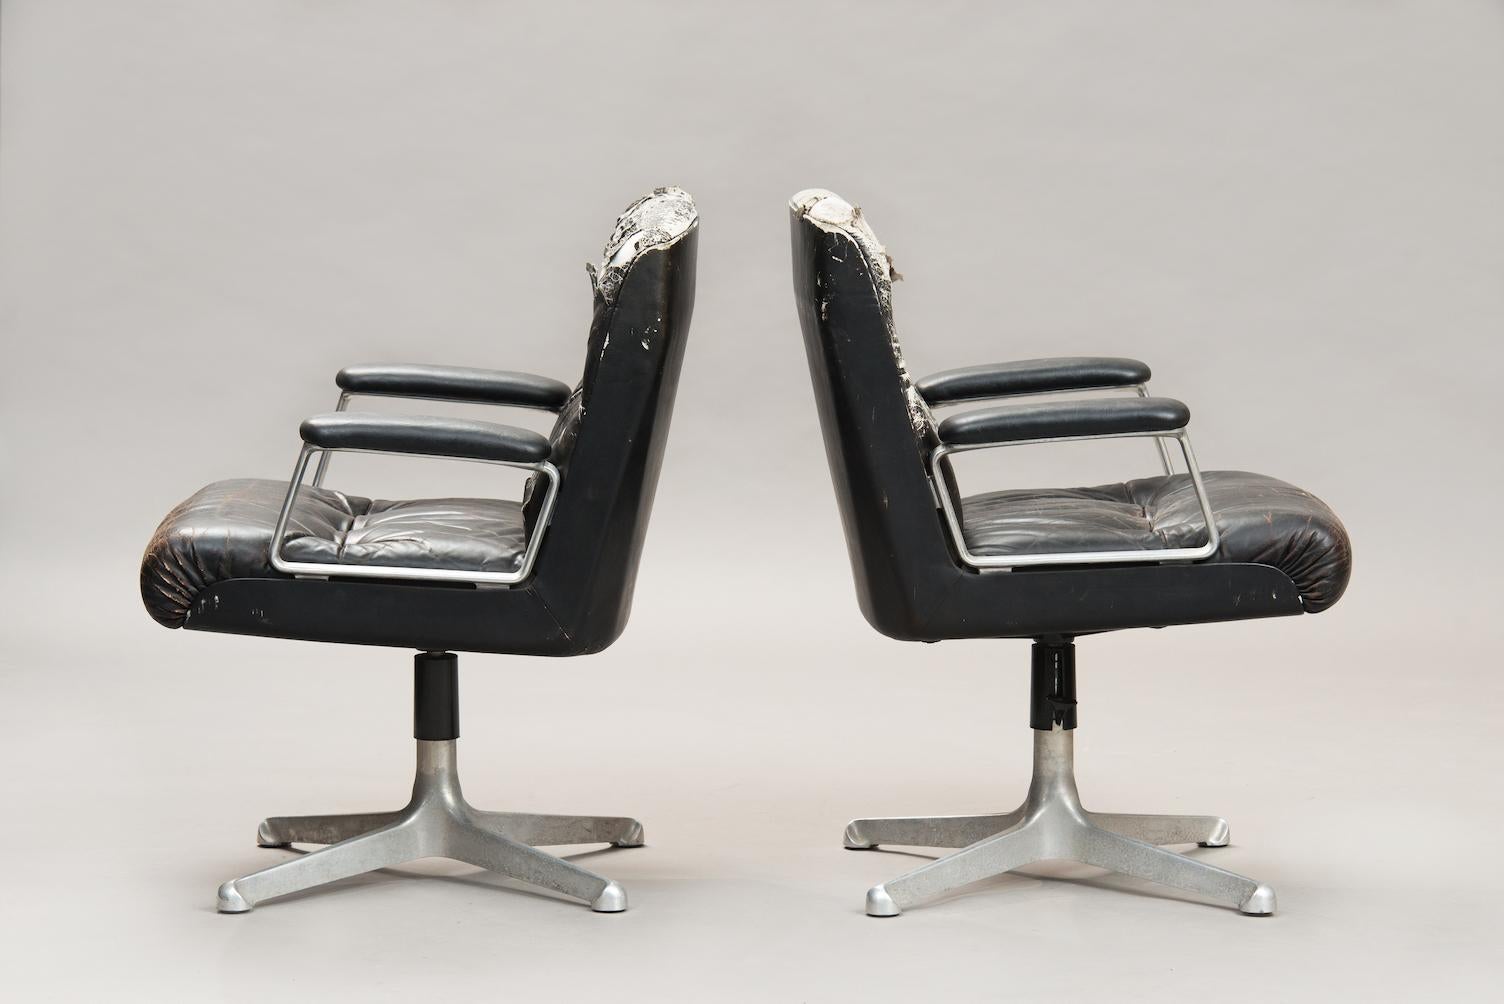 P125 desk chairs designed in 1966 by Osvaldo Borsani for Tecno, Italy, one pair.
Cast polished aluminium base and original black leather upholstery, swivel and adjustable in height.
Measures: W. 66 cm, D 65 cm H. 86 cm (minimum), the other chair